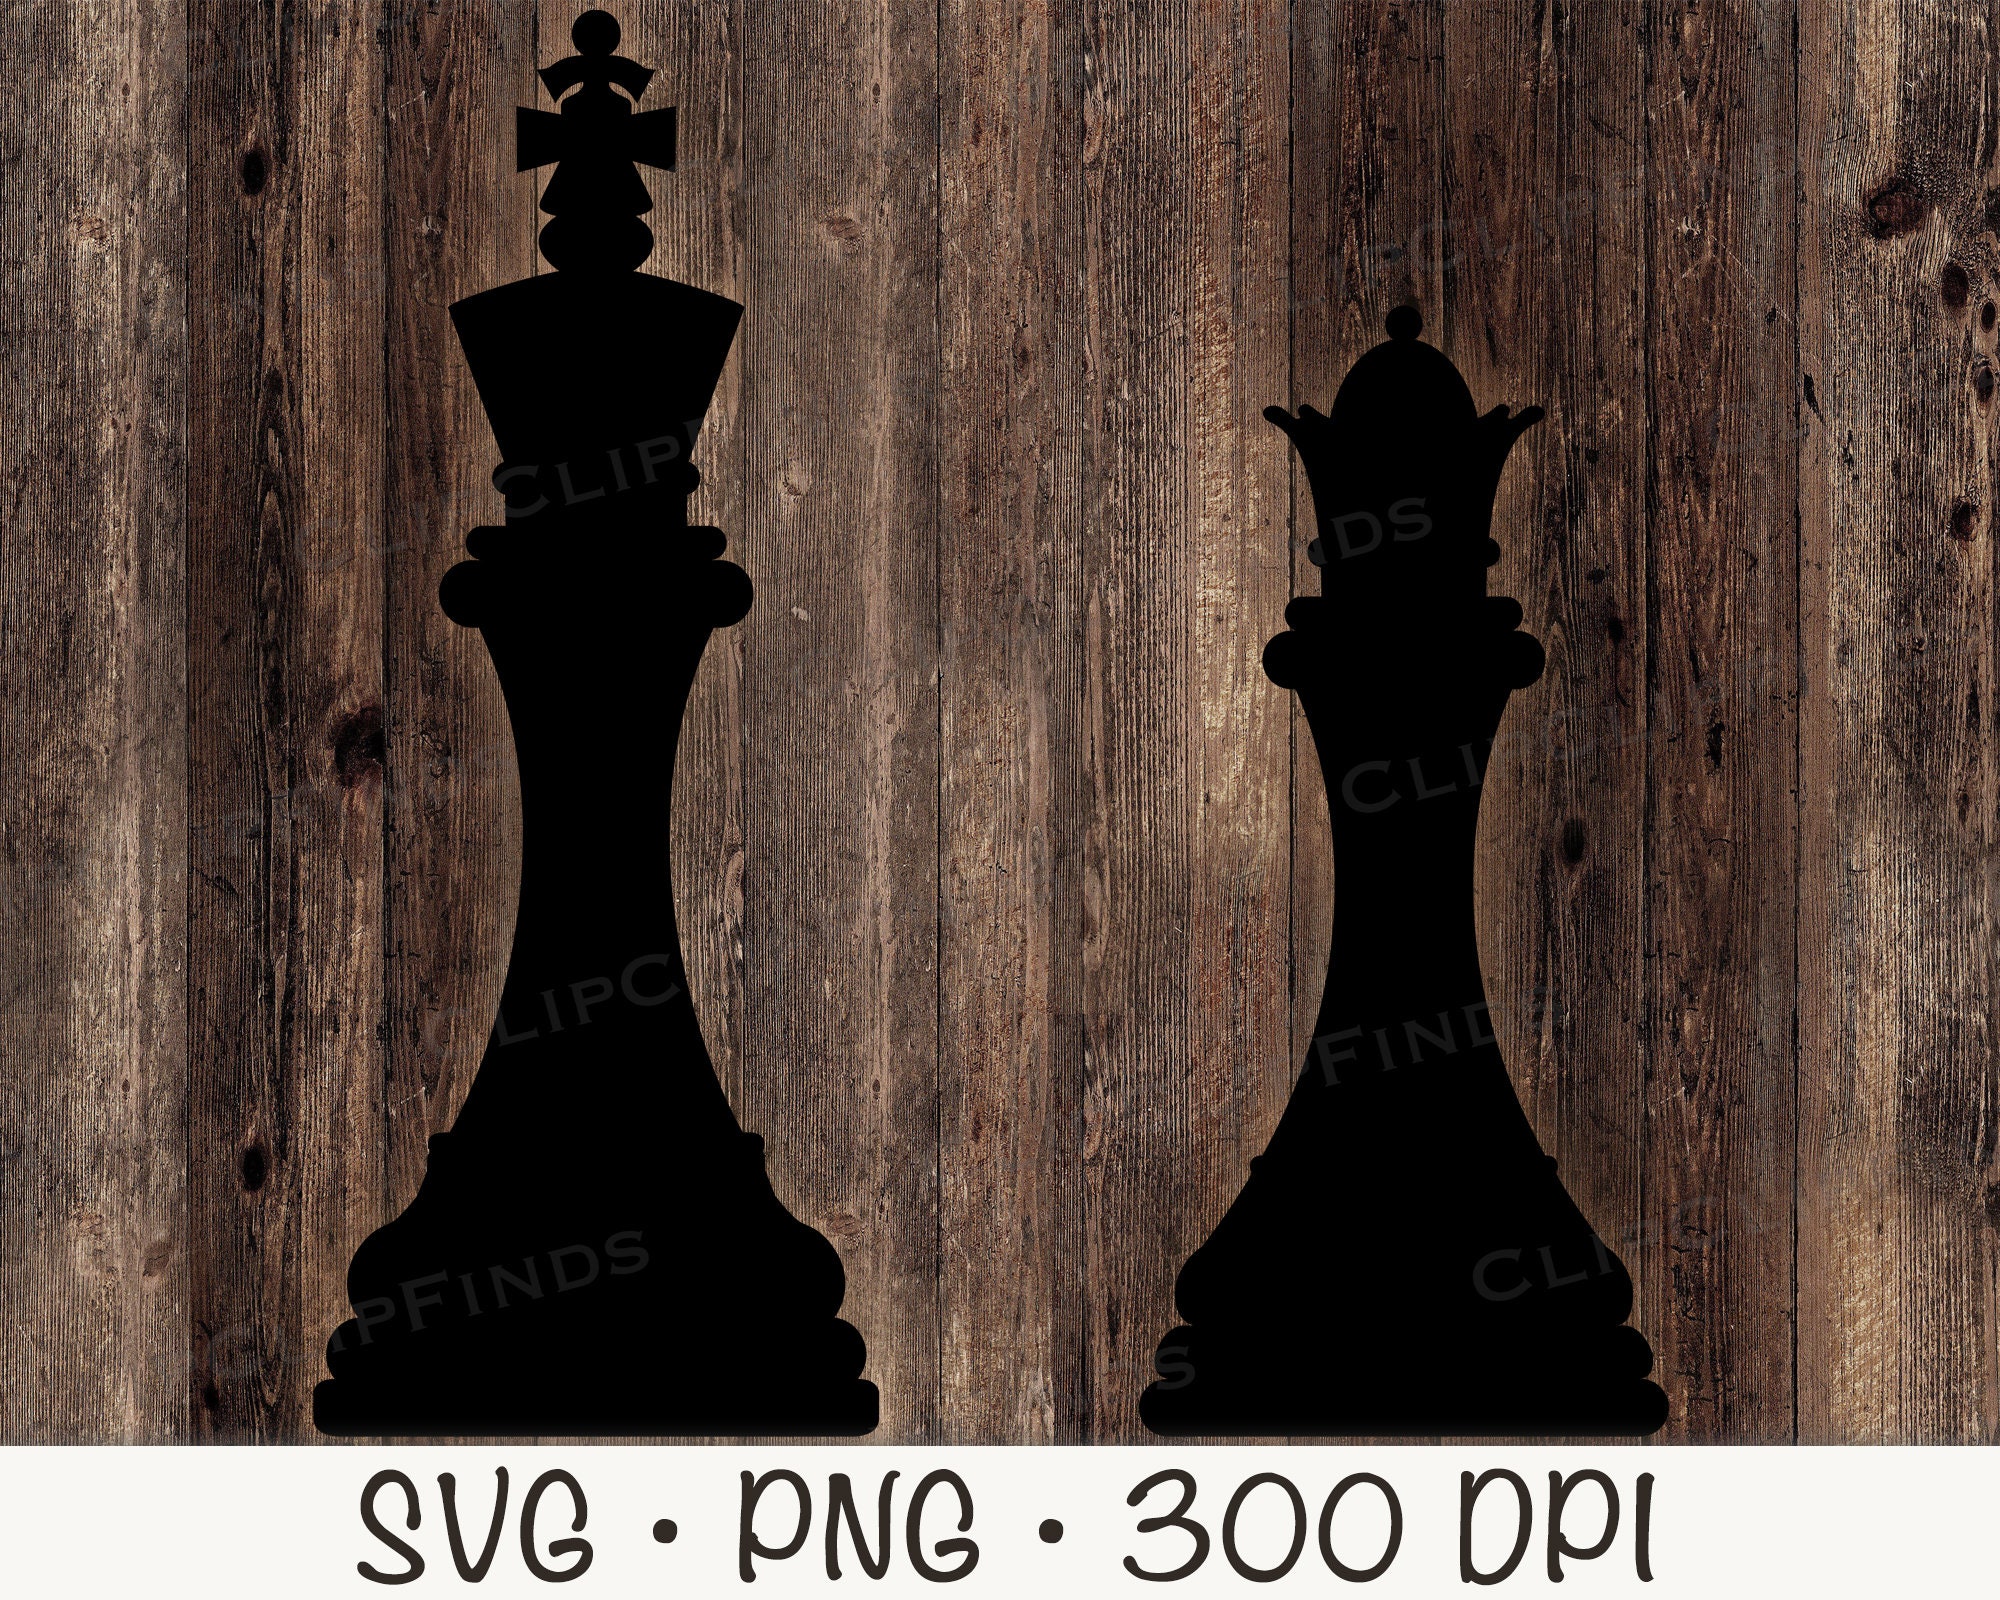 Chess King and Queen SVG Vector Cut File and PNG Transparent -  Sweden